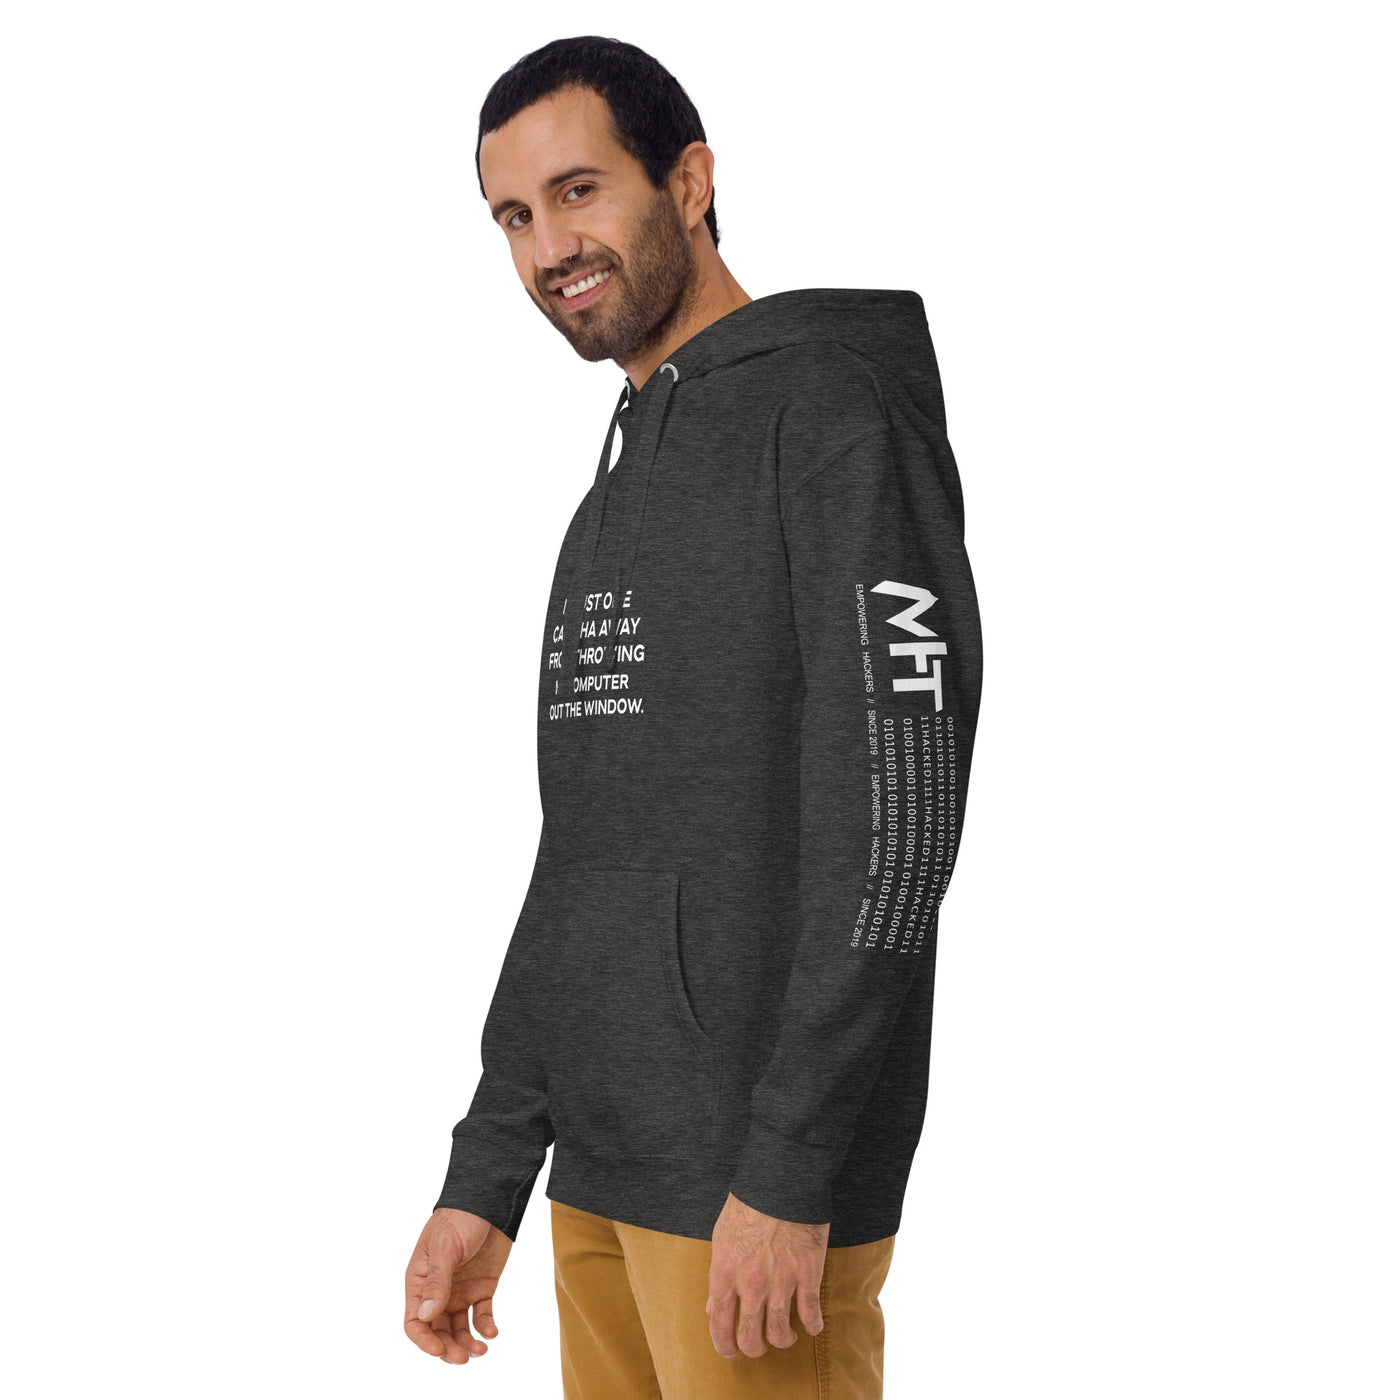 I'm Just one CAPTCHA away from throwing my Computer away - Unisex Hoodie